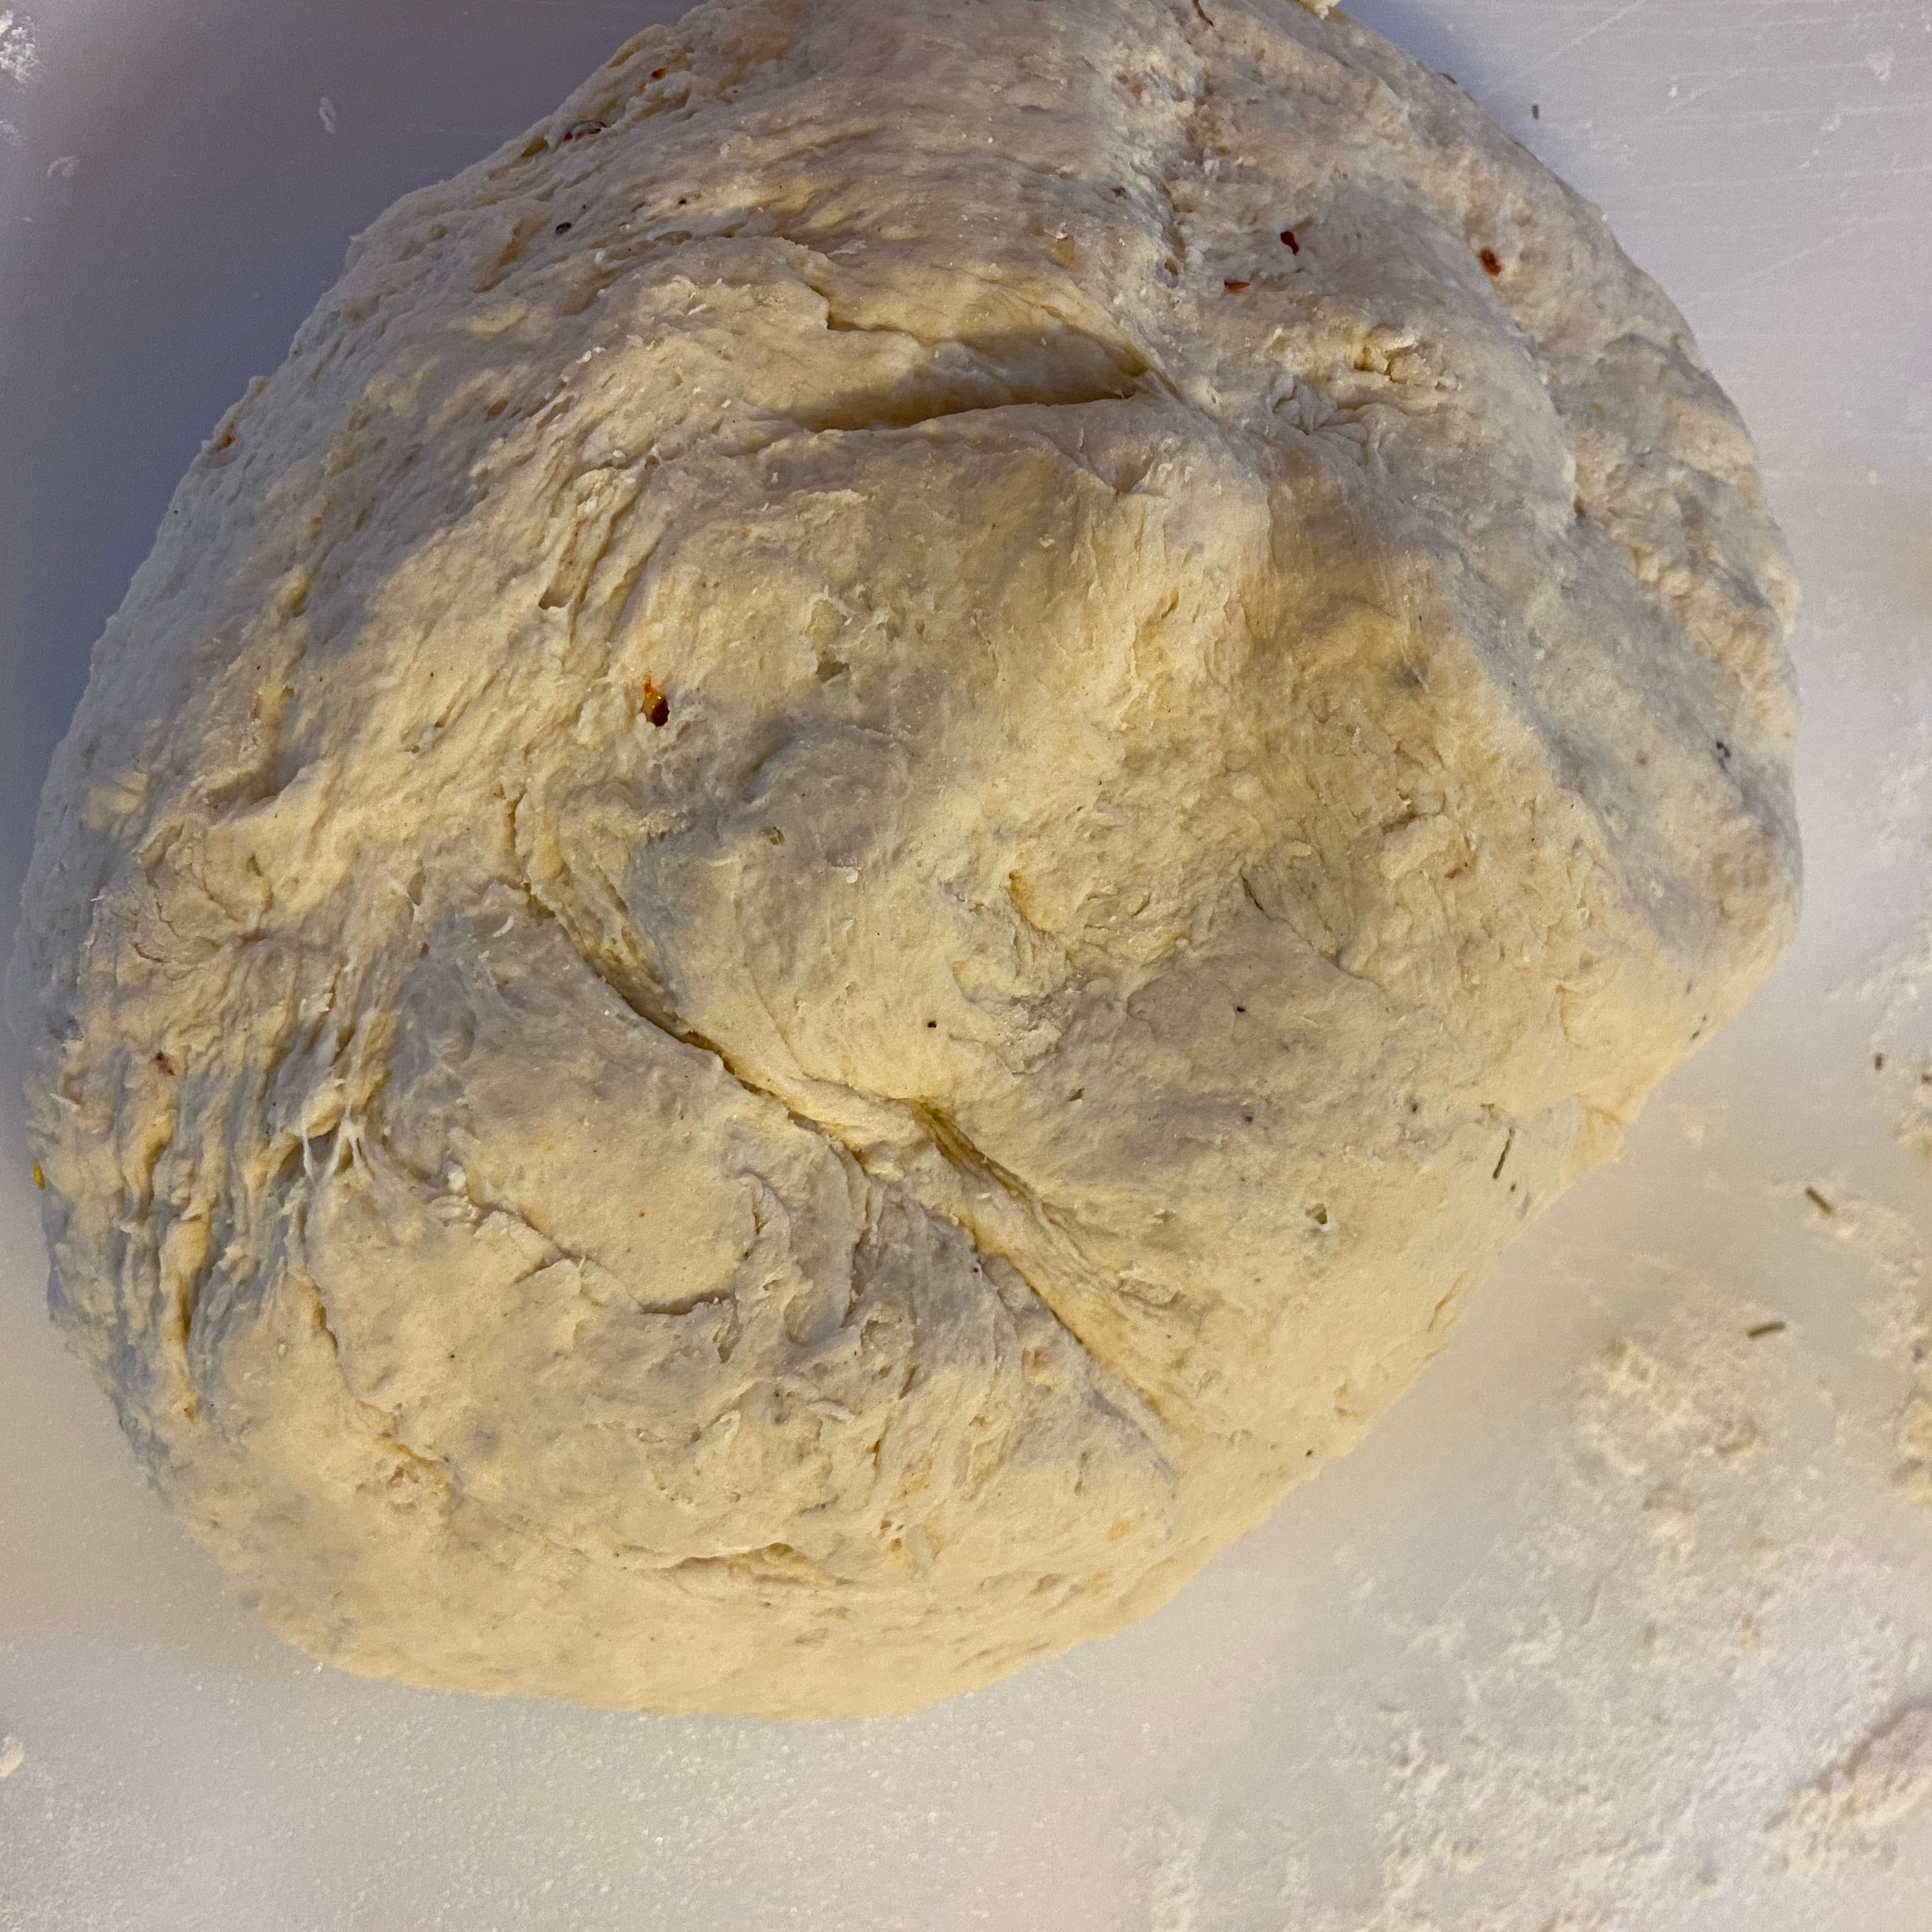 Once the dough is smooth let it destroy for 45 minutes. The volume of the dough should be twice after 45 minutes. 